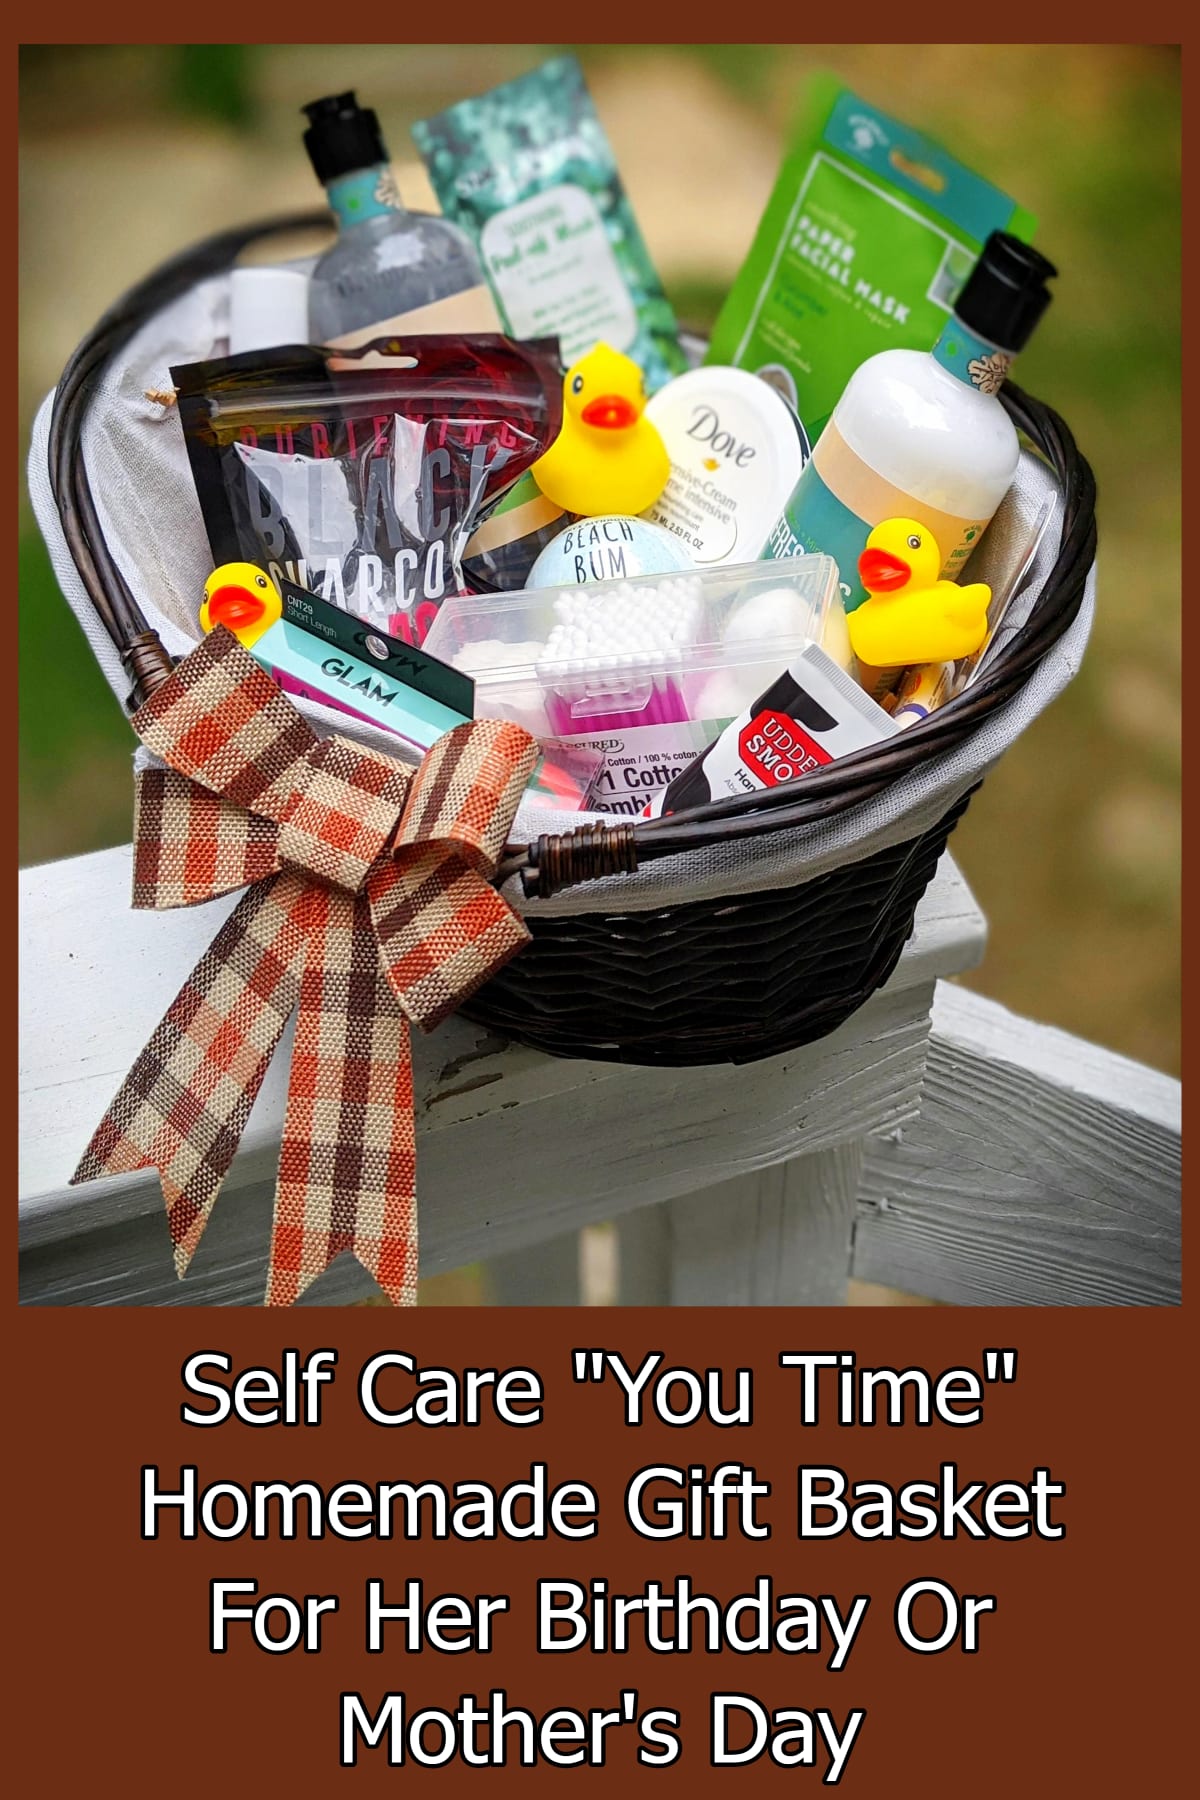 Homemade gift baskets for her birthday or Mother's Day - cute DIY 'You Time' gift basket idea for women